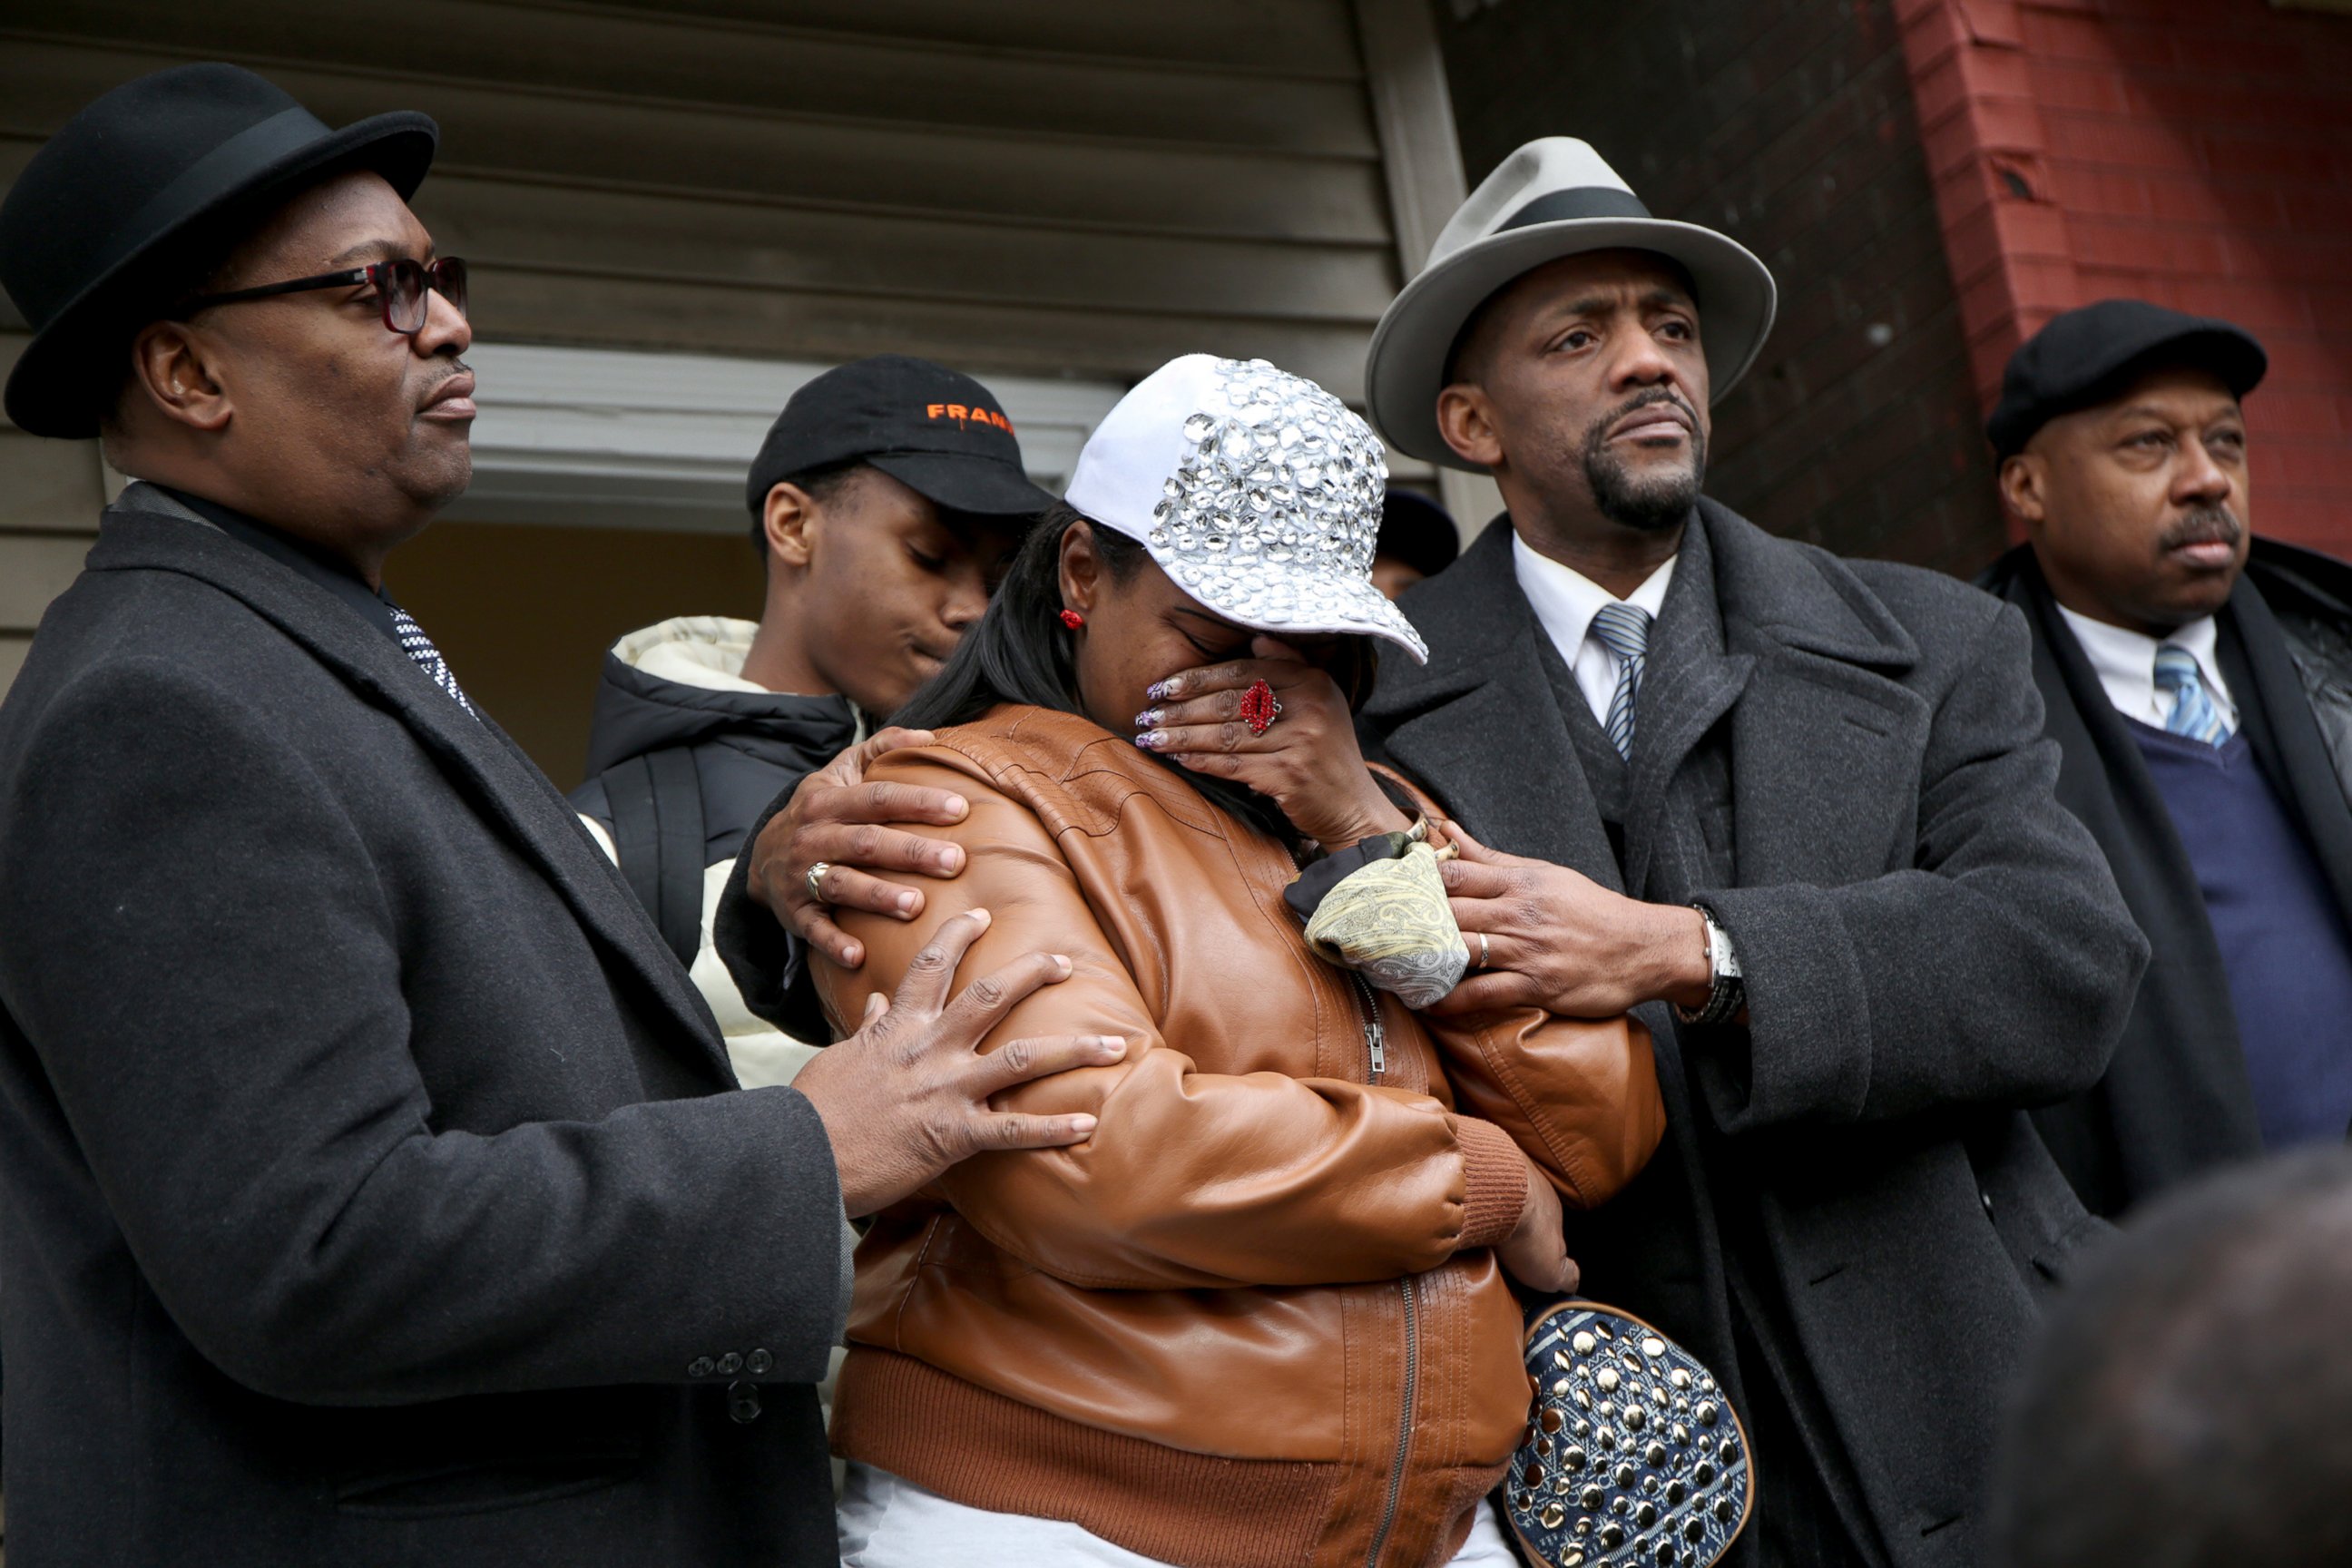 PHOTO: LaTarsha Jones, center, daughter of Bettie Jones, is comforted by family and friends during a press conference, Dec. 27, 2015, in front of the house where Bettie Jones was killed in Chicago on Saturday.